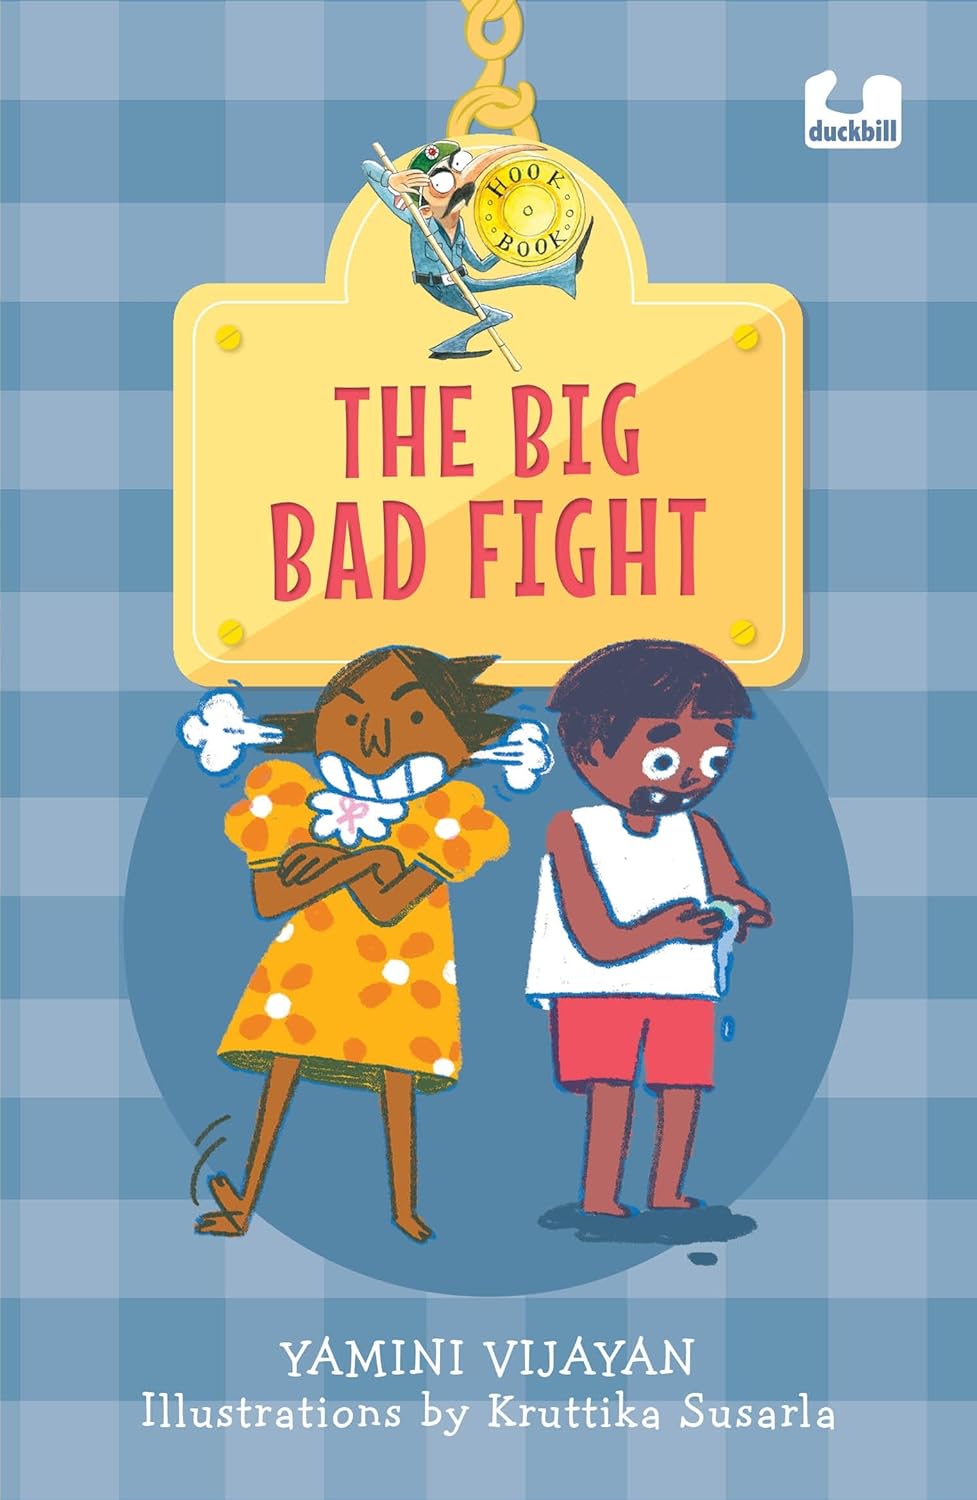 Book Cover
Text: The Big Bad Fight
Yamini Vijayan
Illustrations by Kruttika Susarla
Image of two children looking in opposite directions. One is fuming, the other is upset